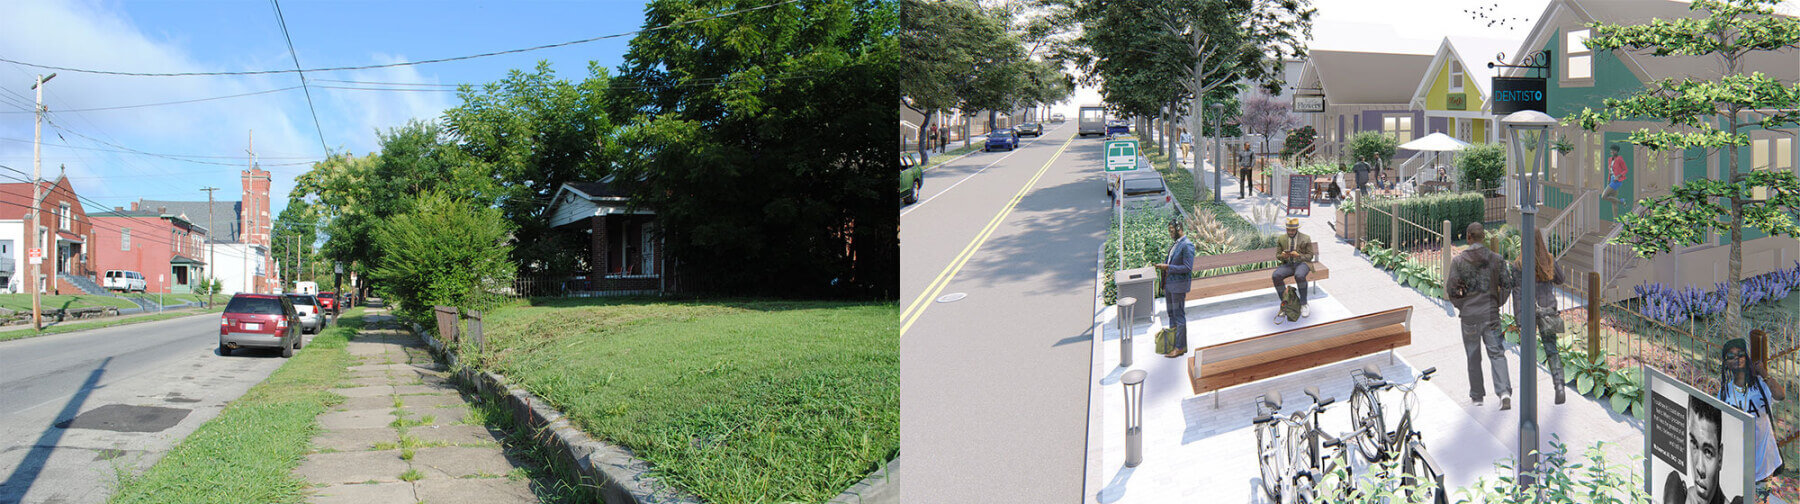 A before and after photo showing the exisiting road and the rendering of the Muhammad Ali Boulevard